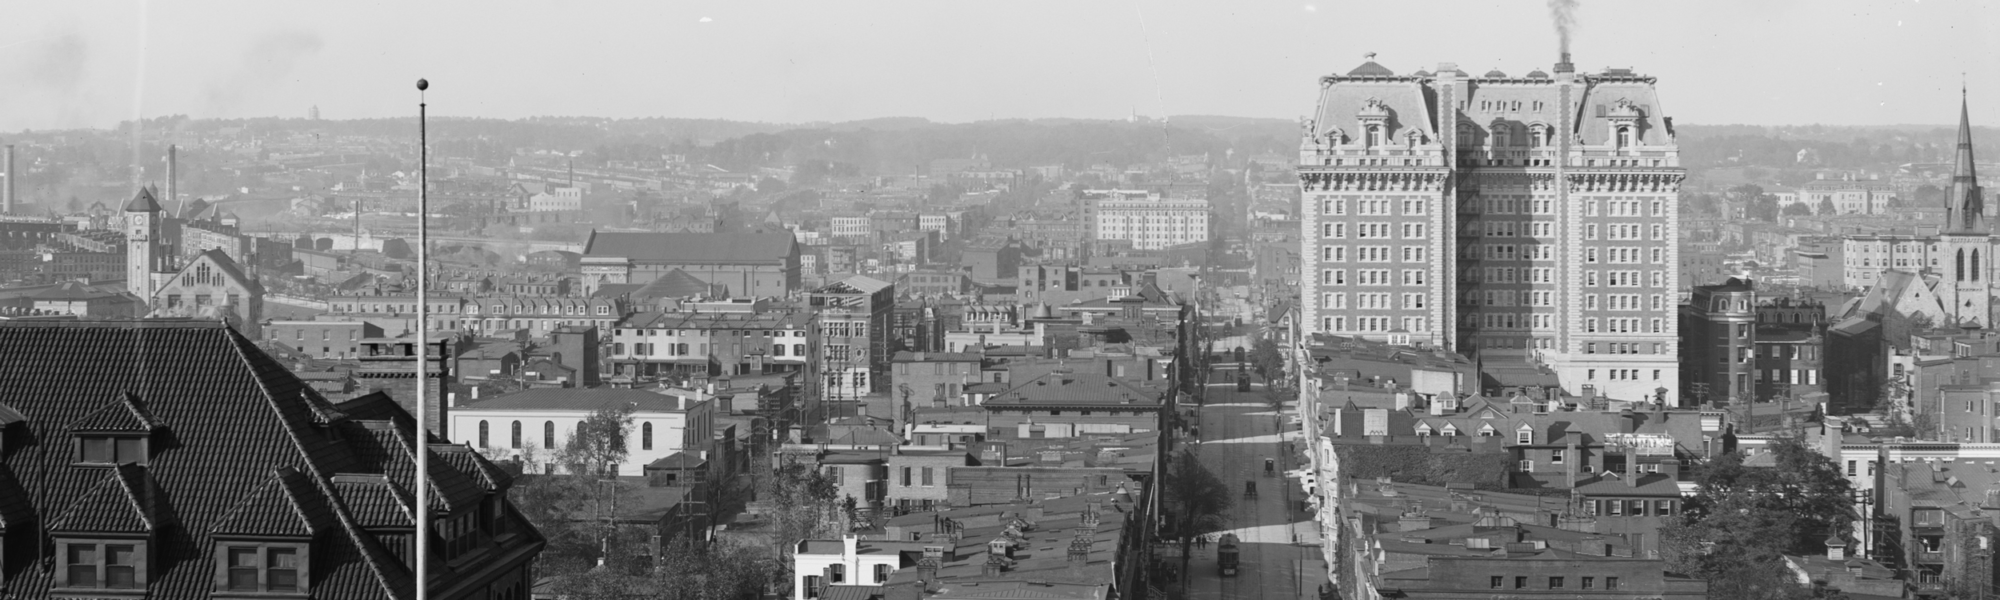 1906ViewFromMonument_Cropped